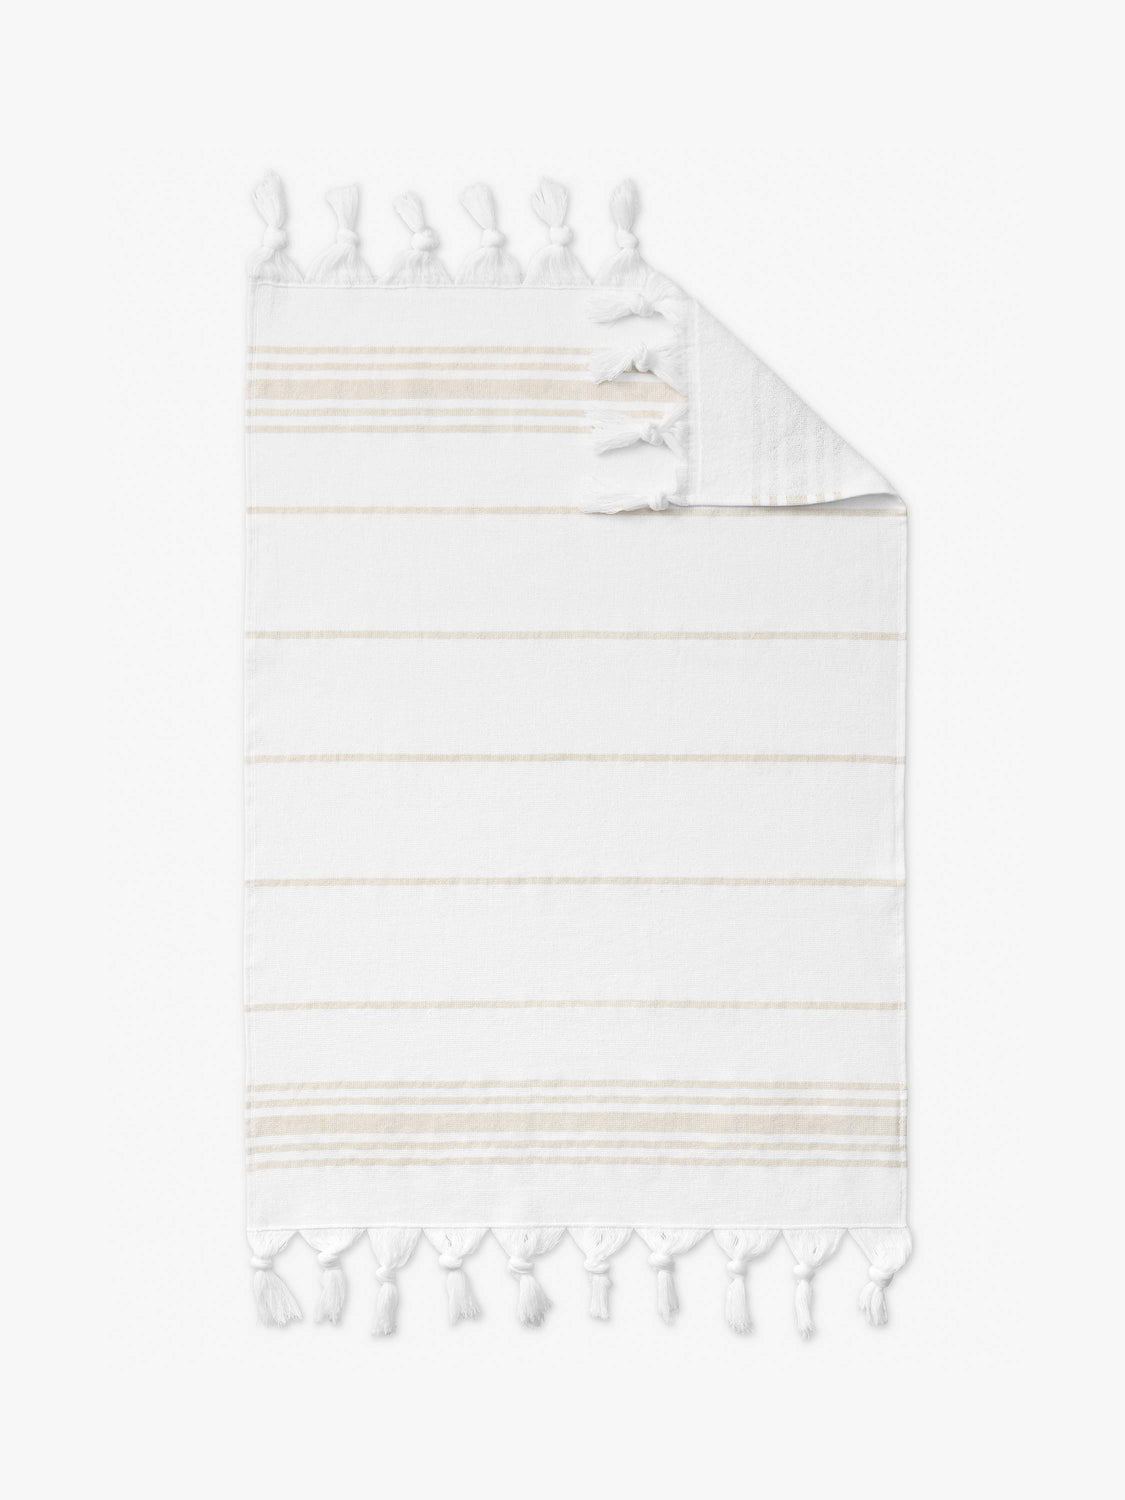 A tan and white luxury Turkish hand towel laid out.